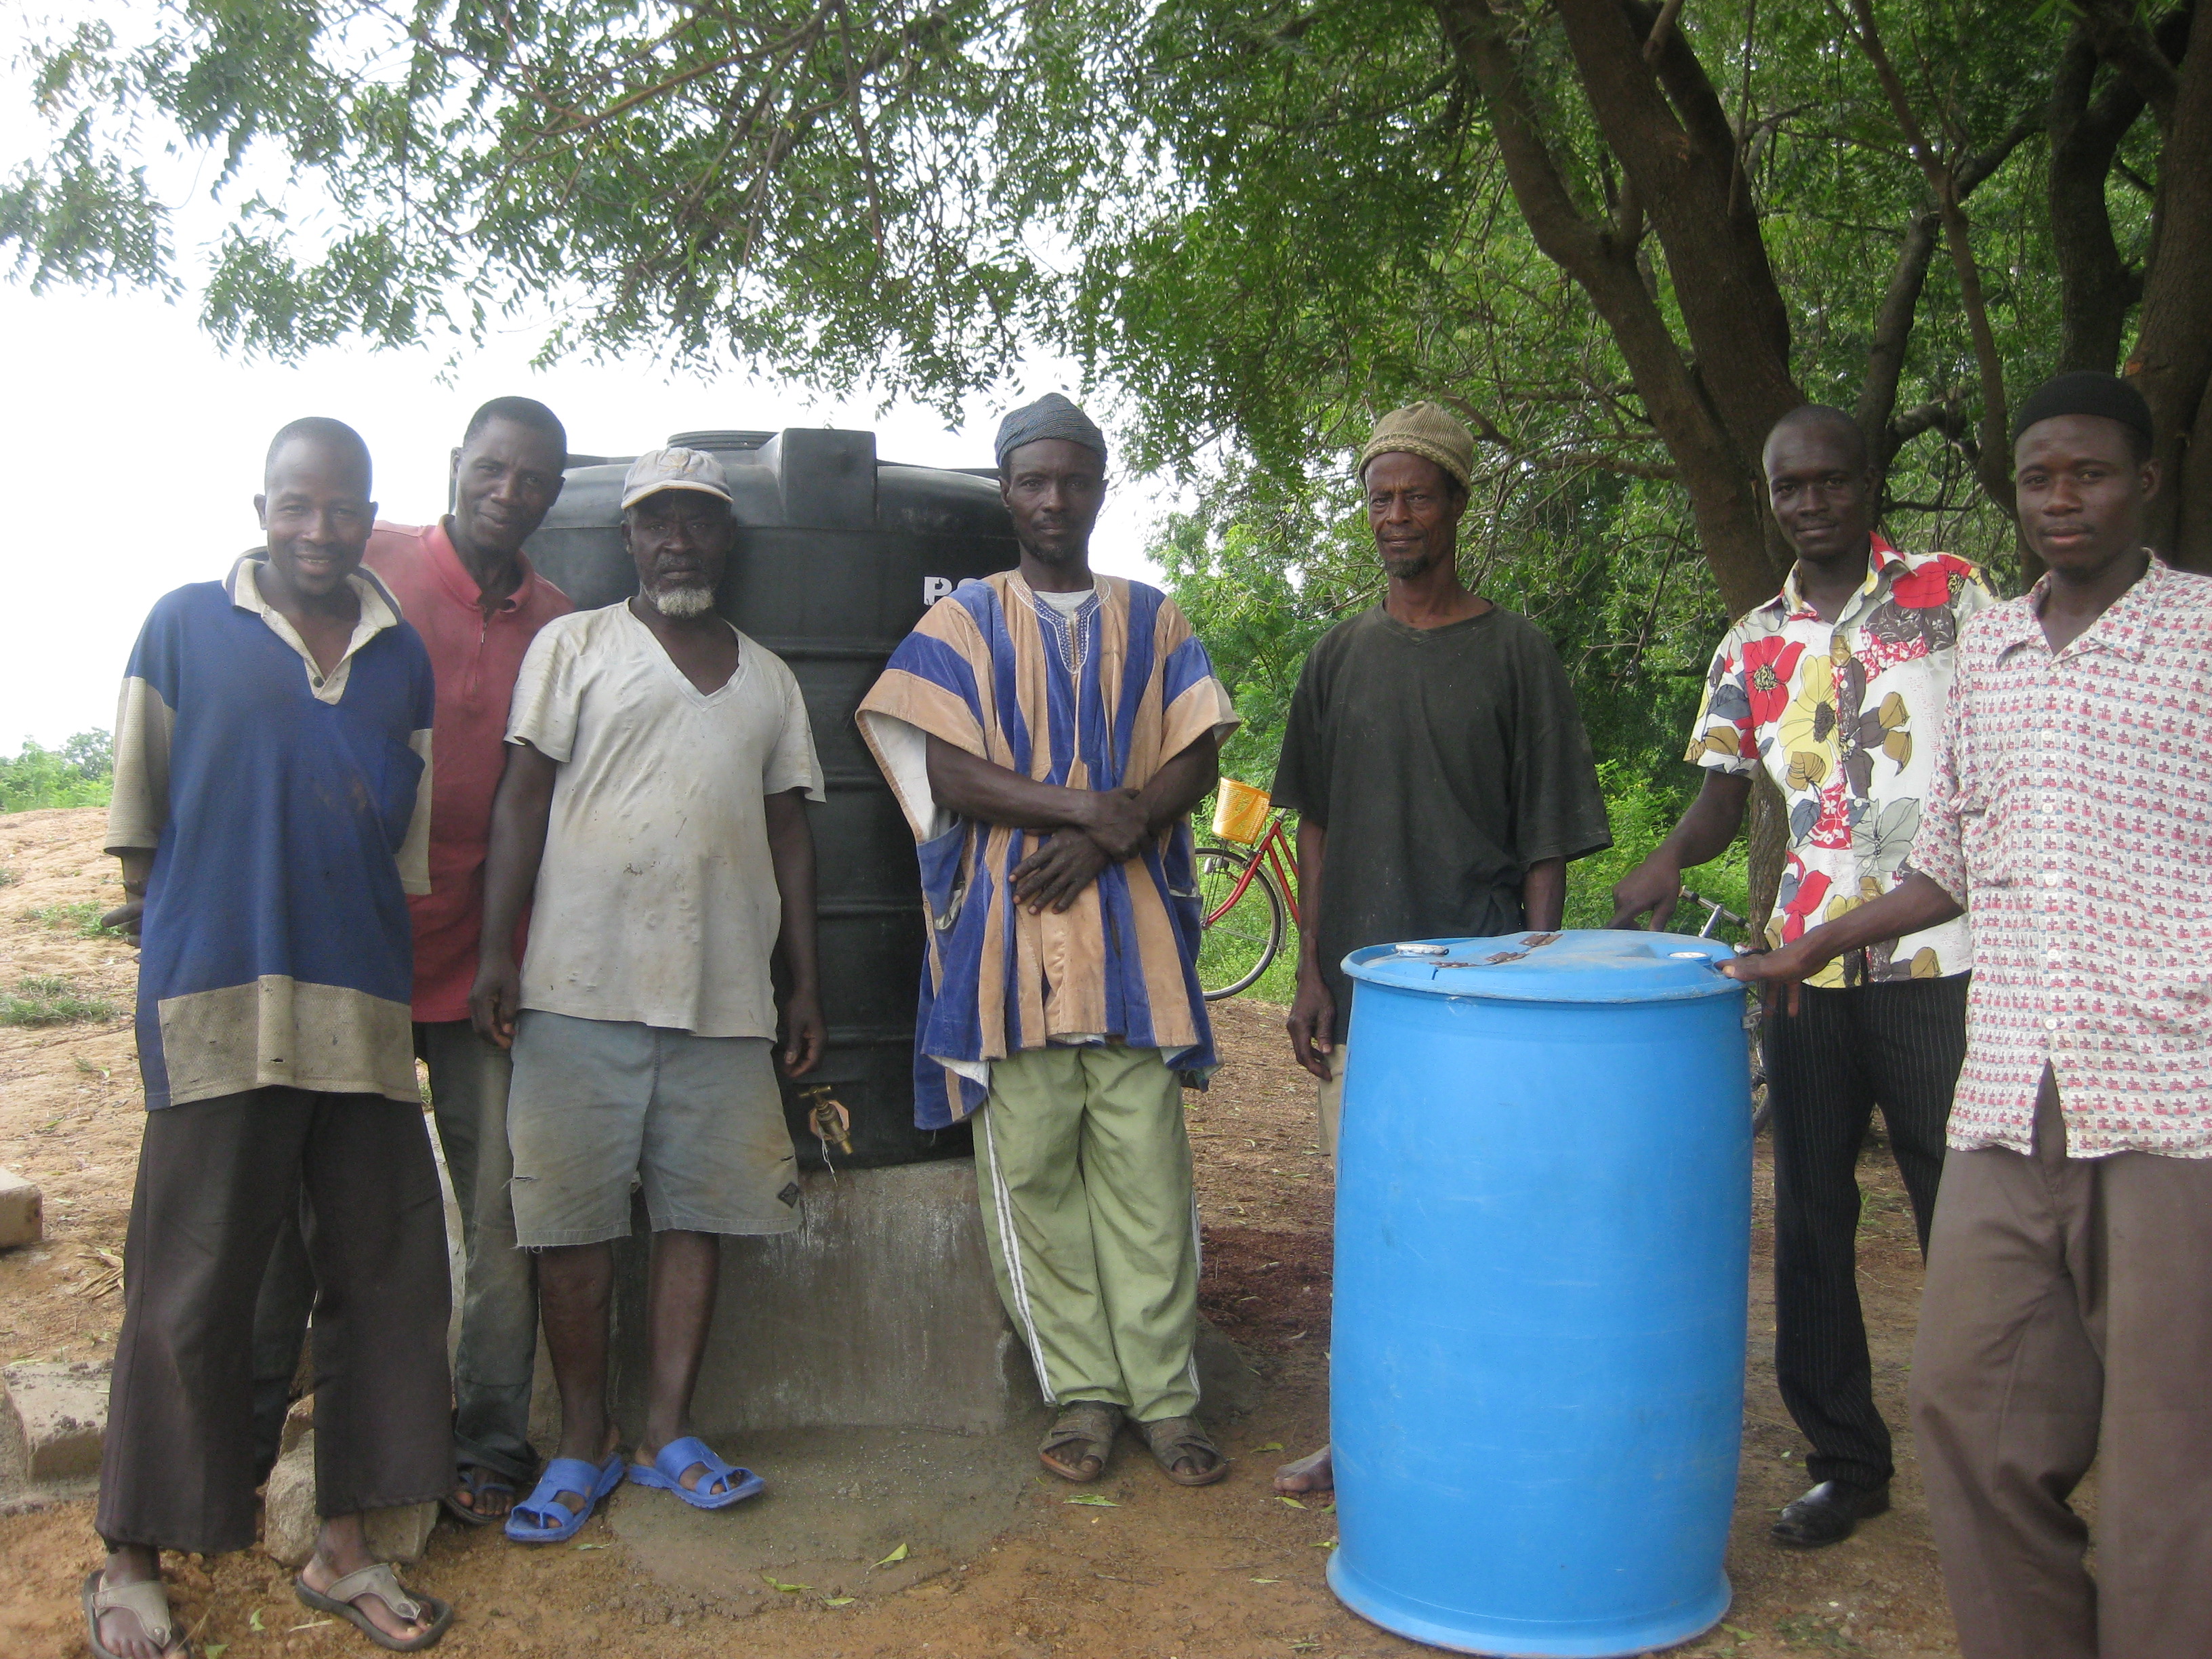 Some of the men from Jarigu who helped set up the water treatment center